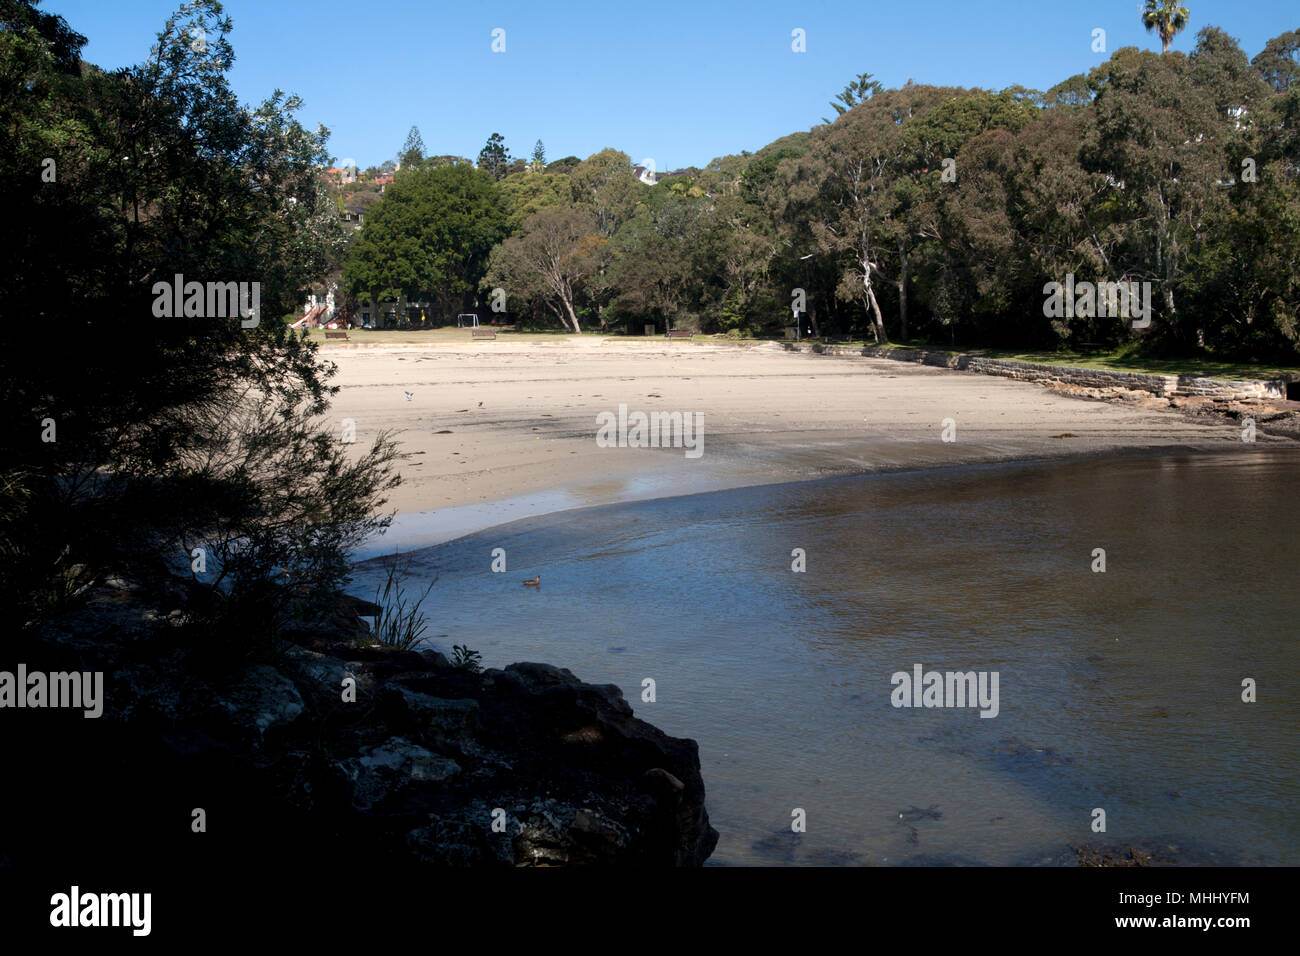 beach parsely bay vaucluse sydney new south wales australia Stock Photo